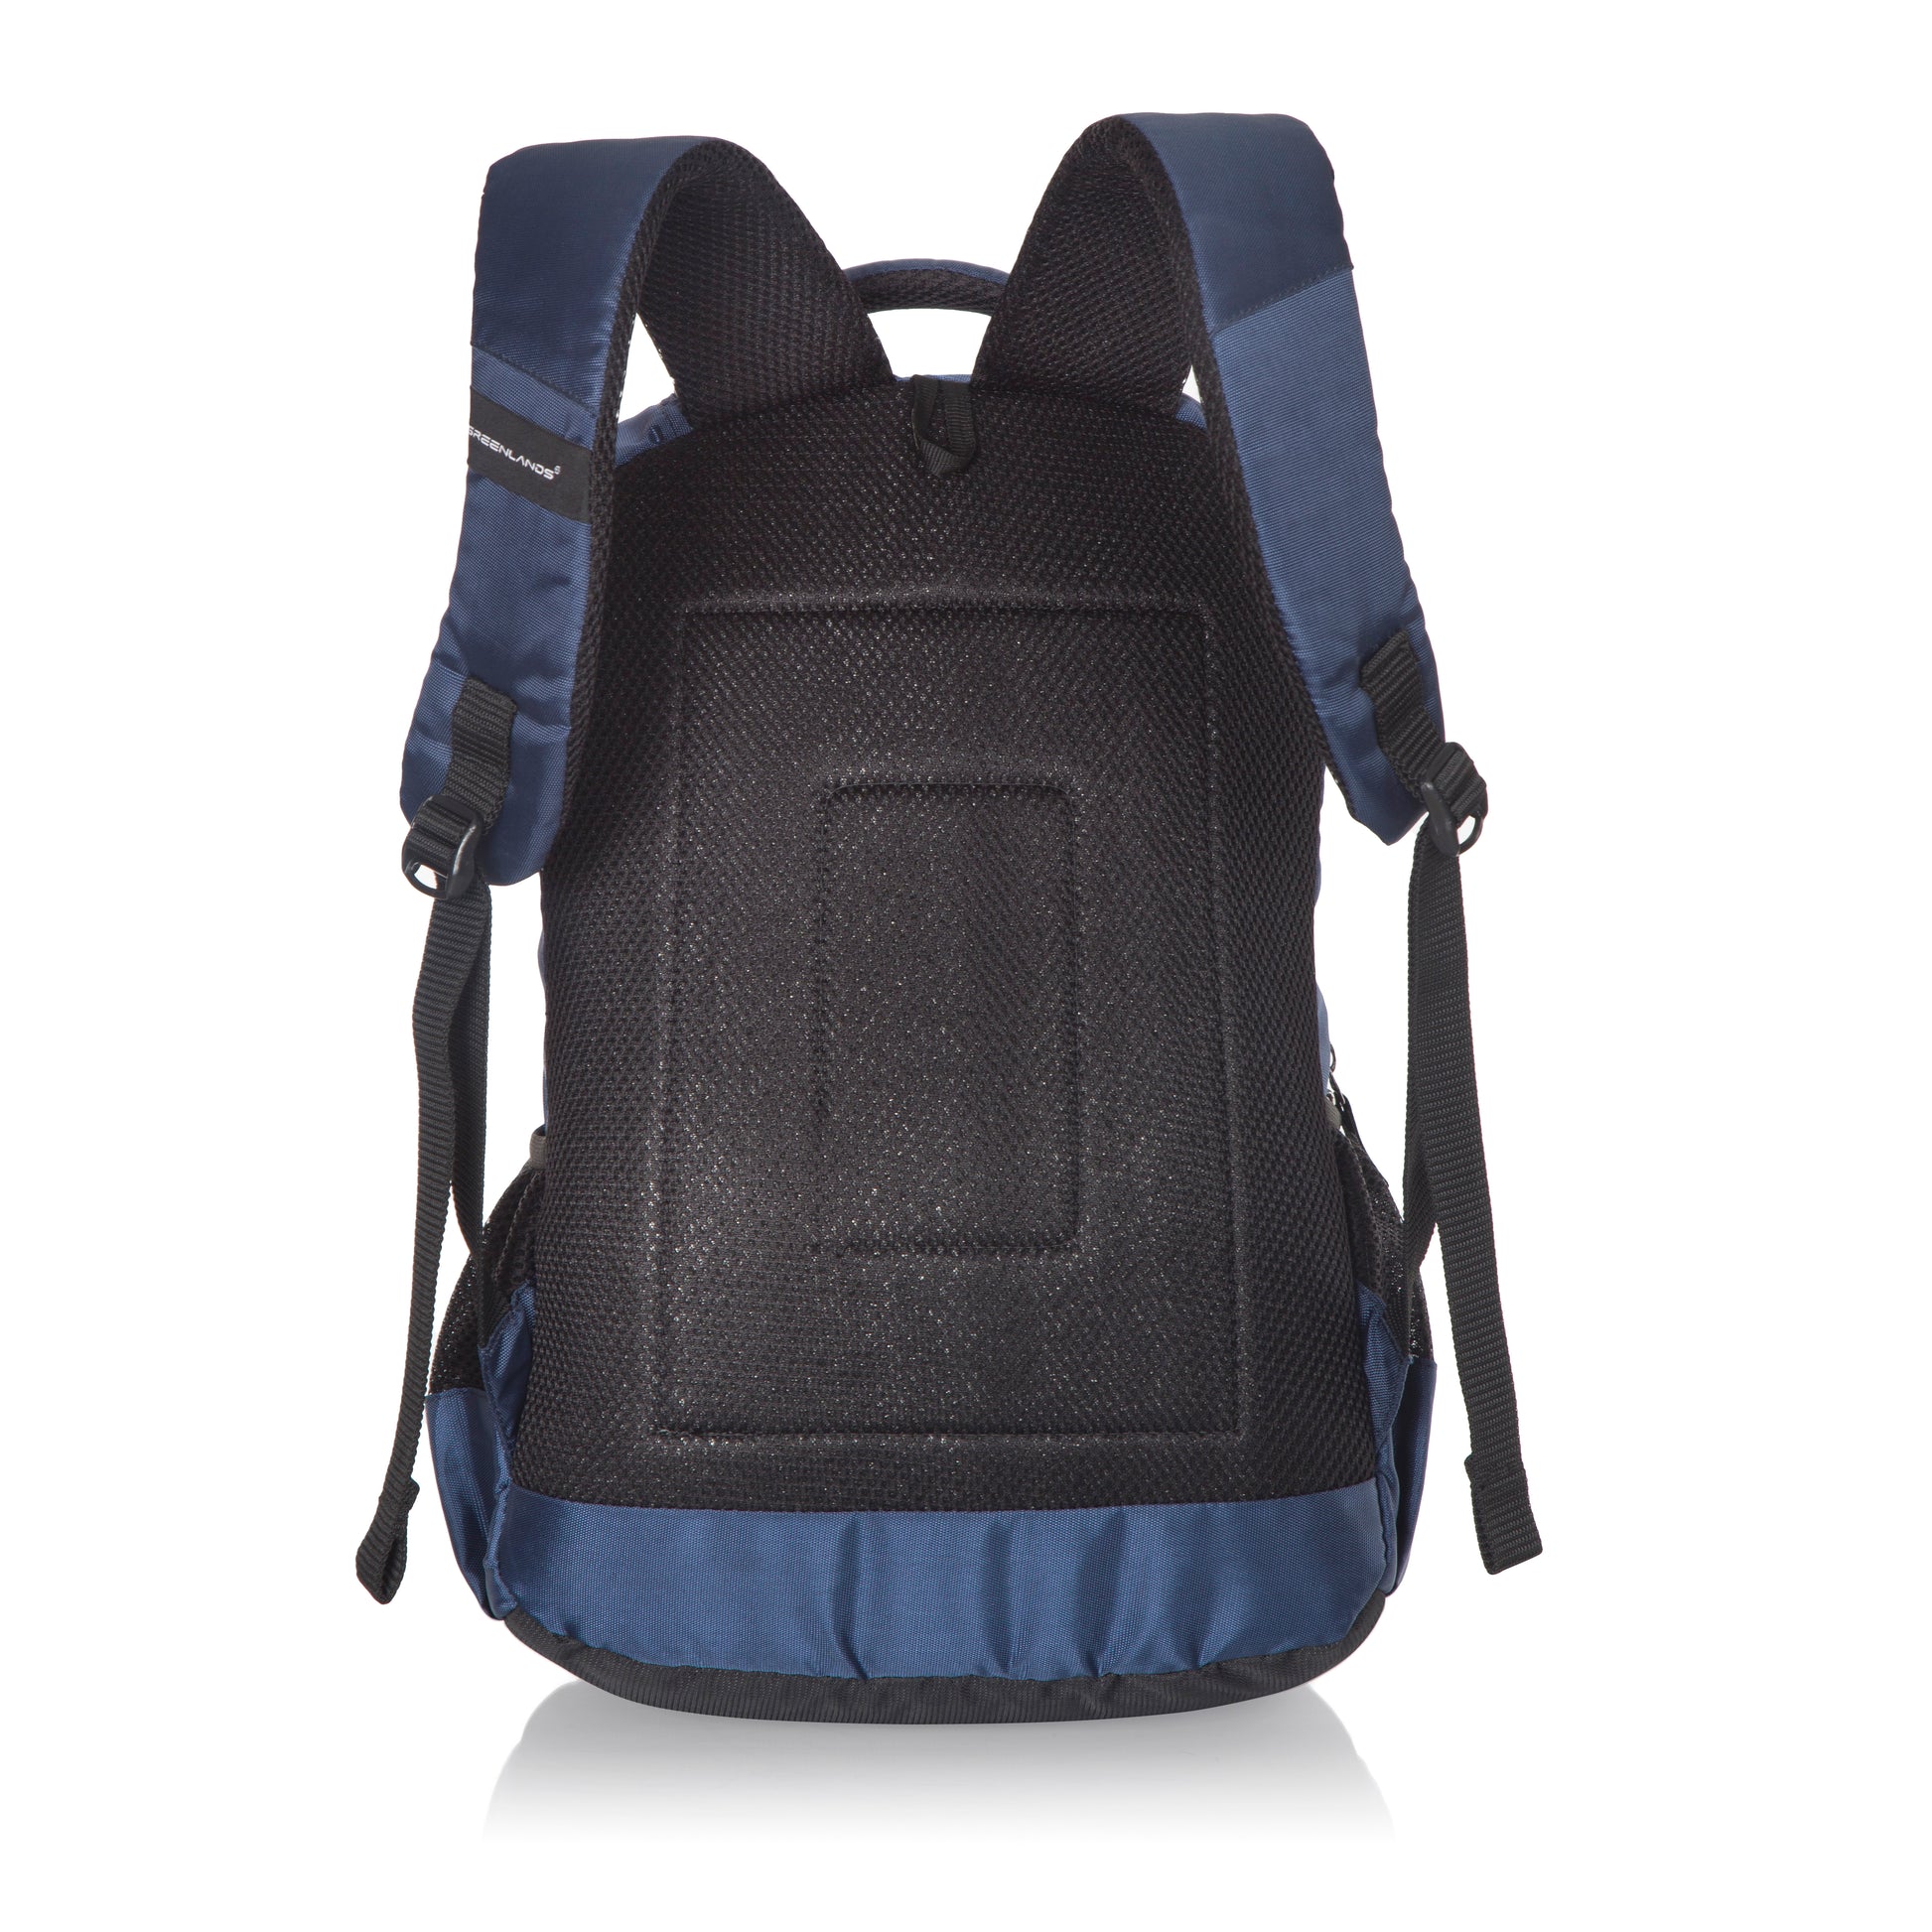 Greenlands Tempo Backpack - Blue Aztec